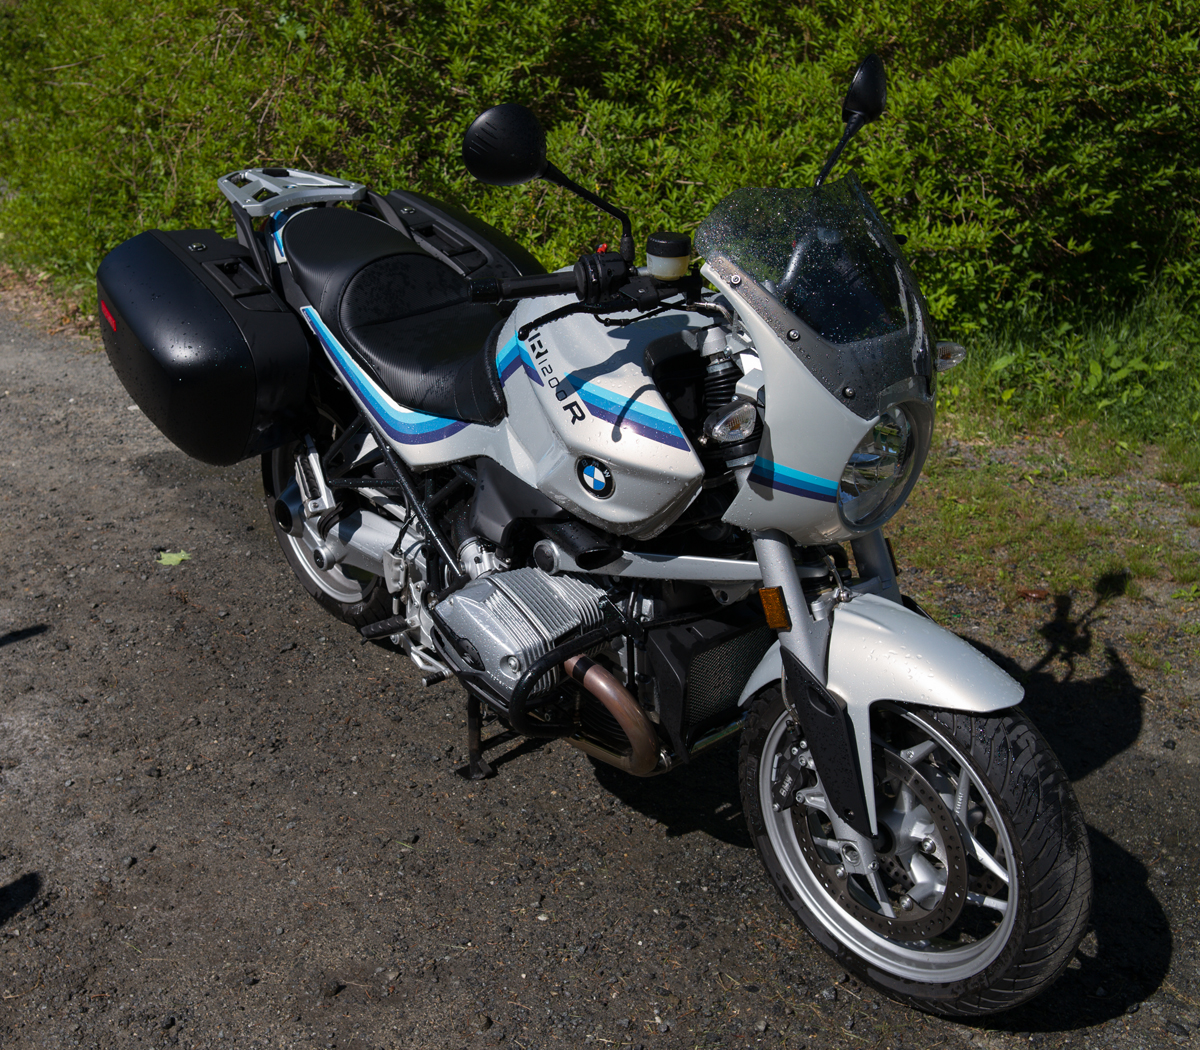 Bmw motorcycle dealers in vermont